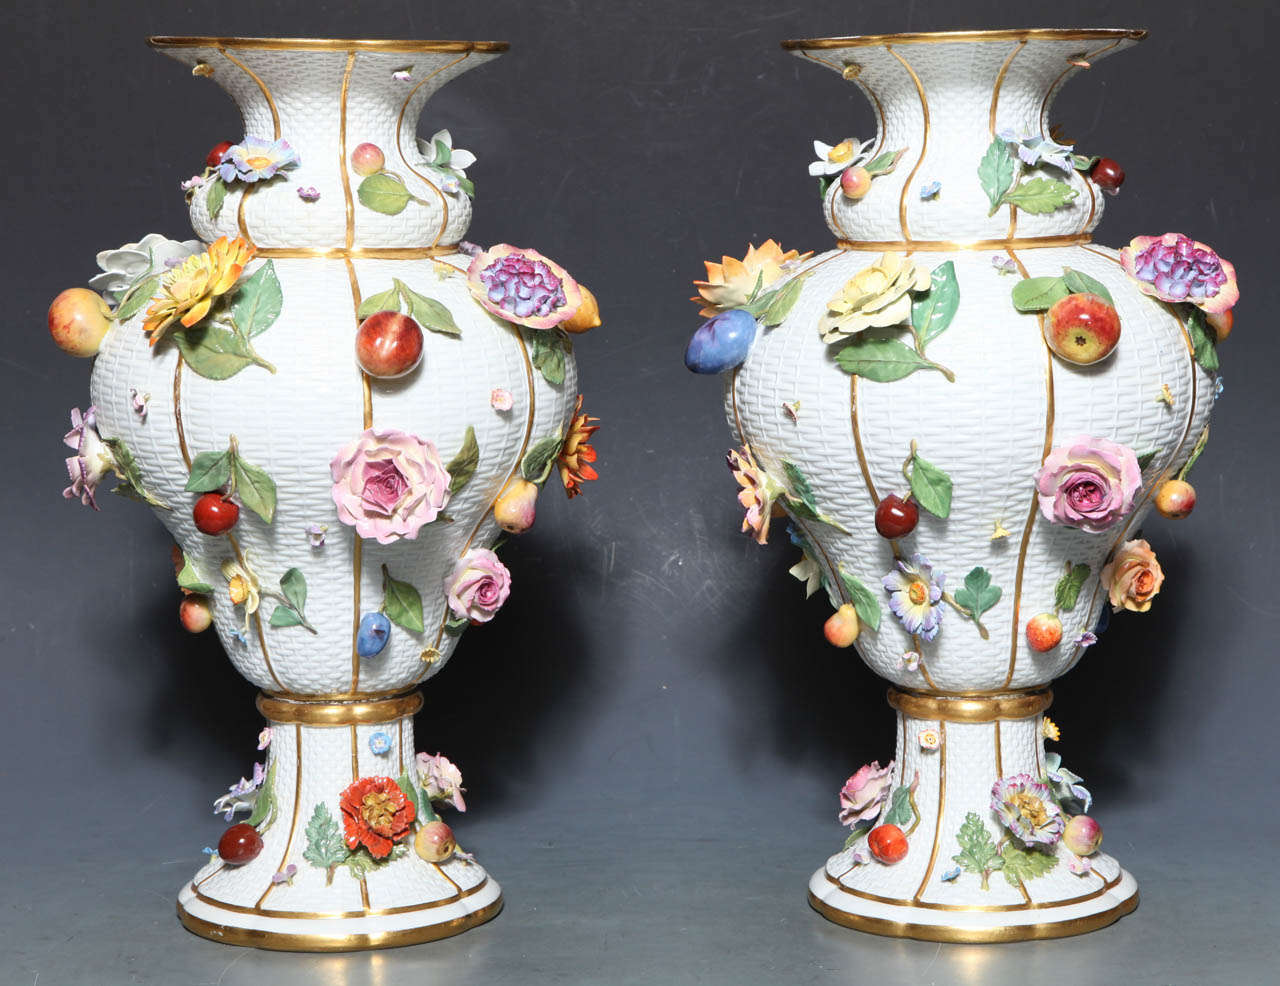 A monumental pair of 19th century Meissen Porcelain vases of exceptional quality. These Vases show one of Meissen's signature motifs, the realistically modeled fruits and flowers (raised on a basket weave background), to great advantage. The apples